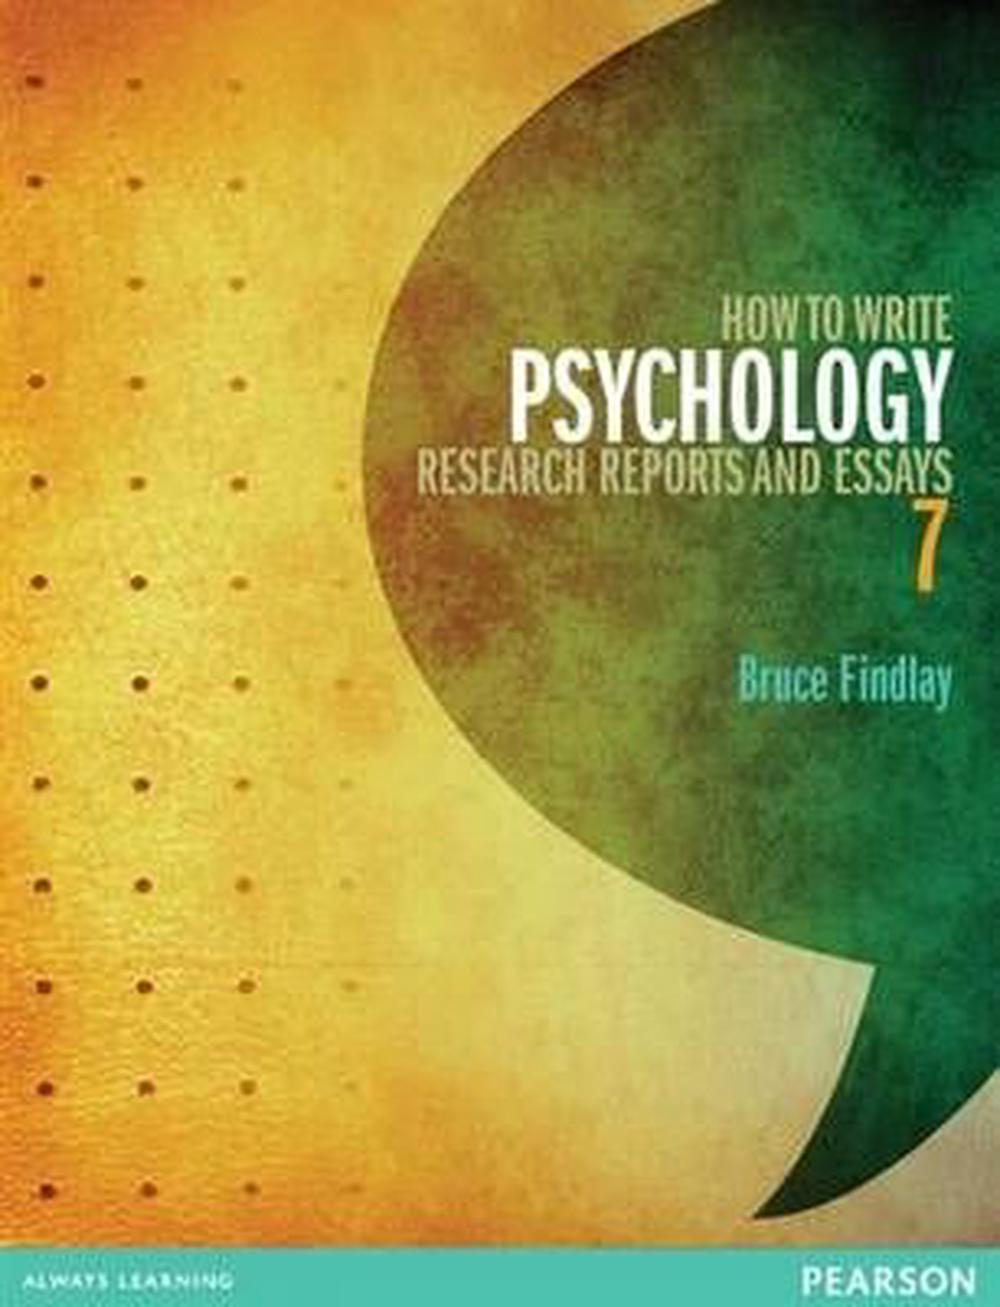 how to write psychology reports and essays findlay